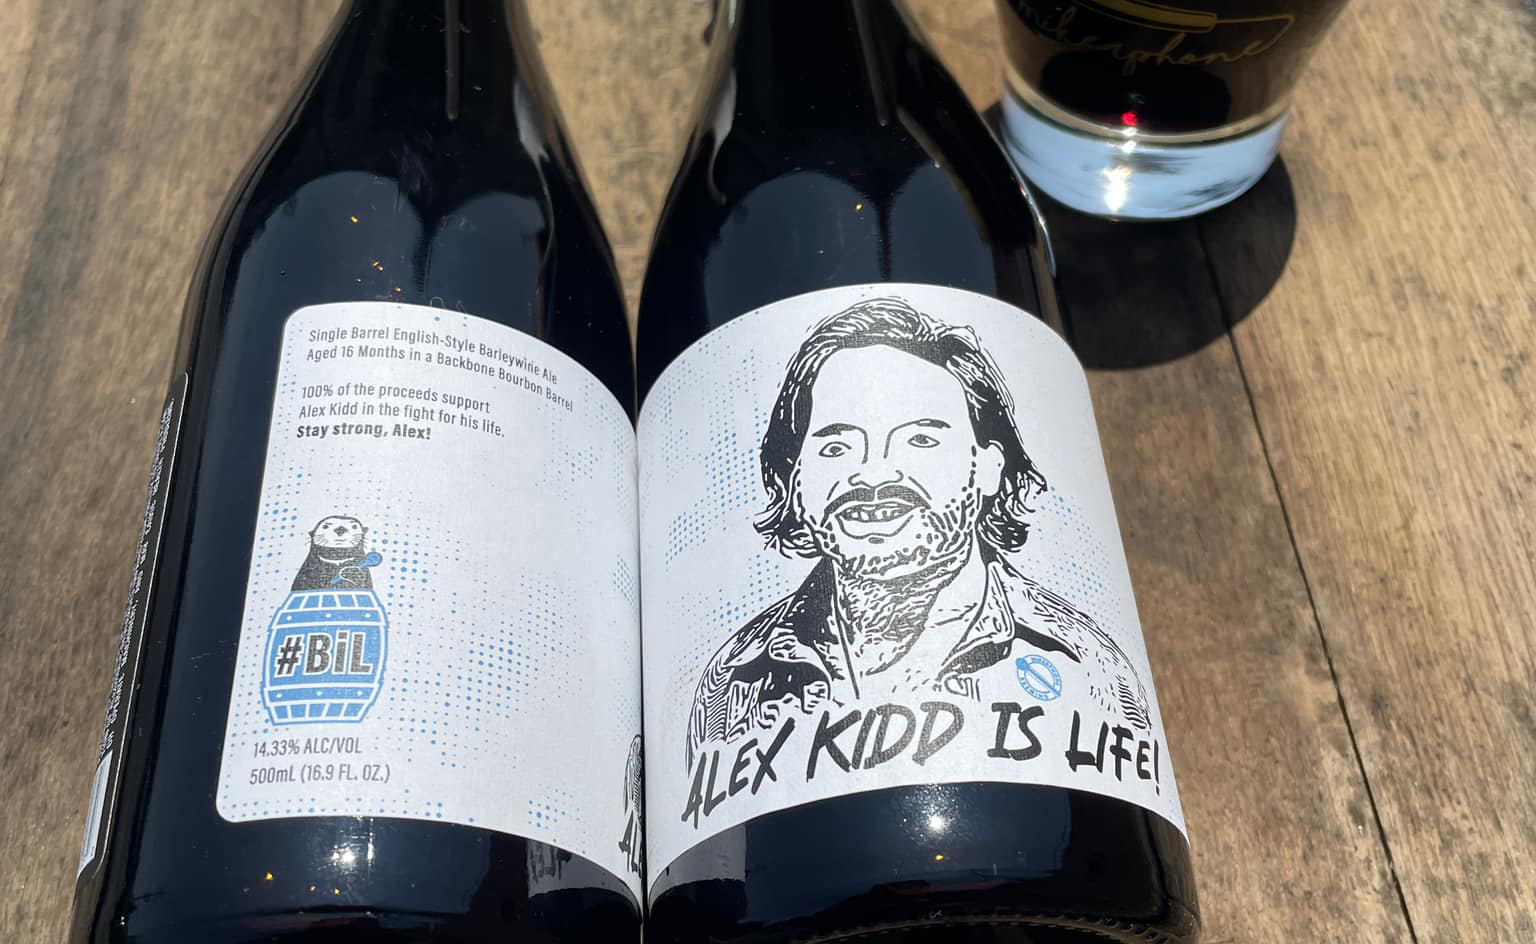 Brewery release photo for Alex Kidd if Life!